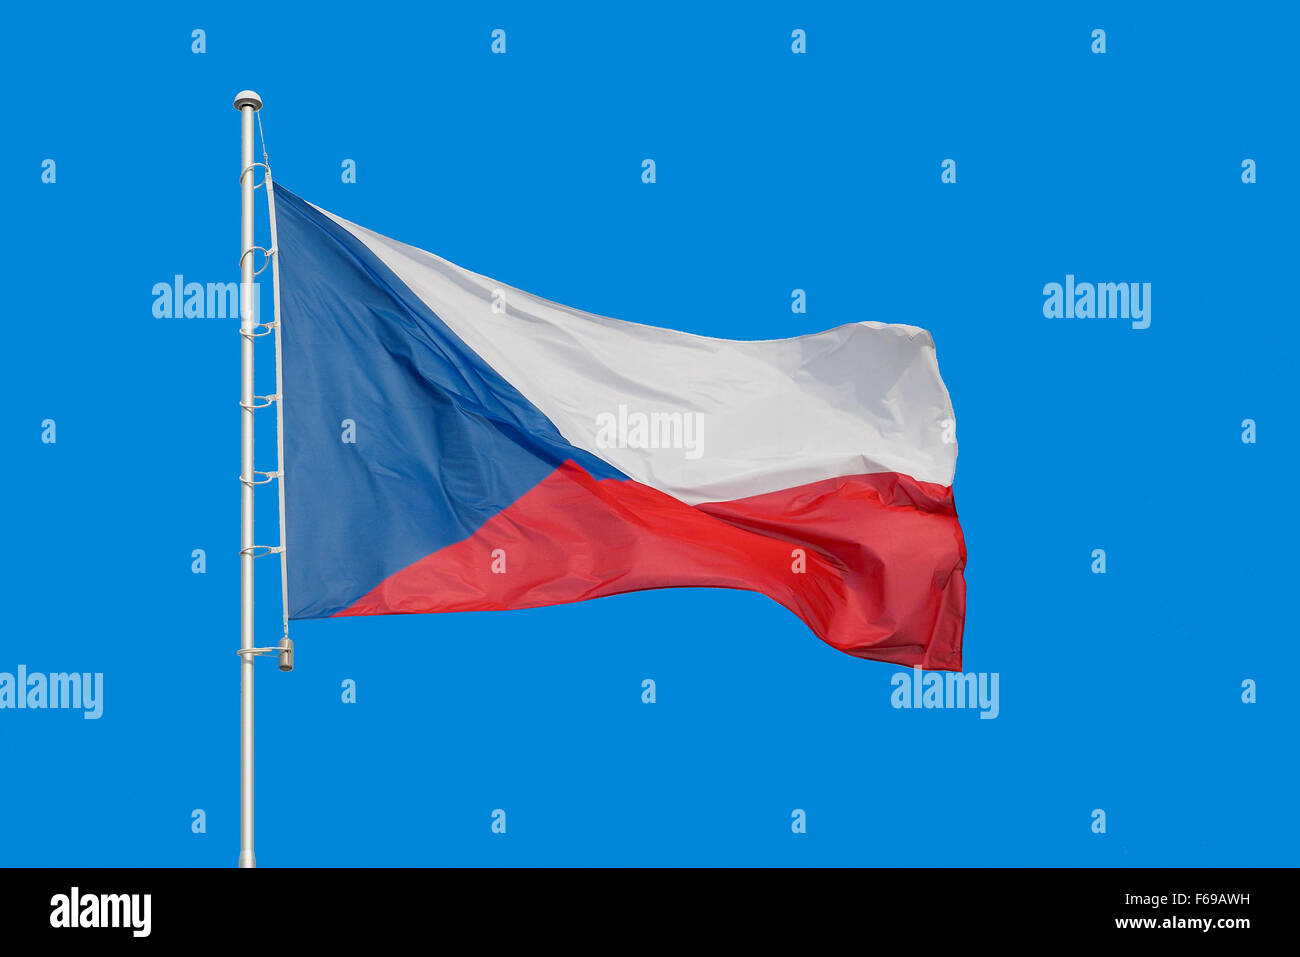 Flag of Czech Republic on pole, with text space around it Stock Photo